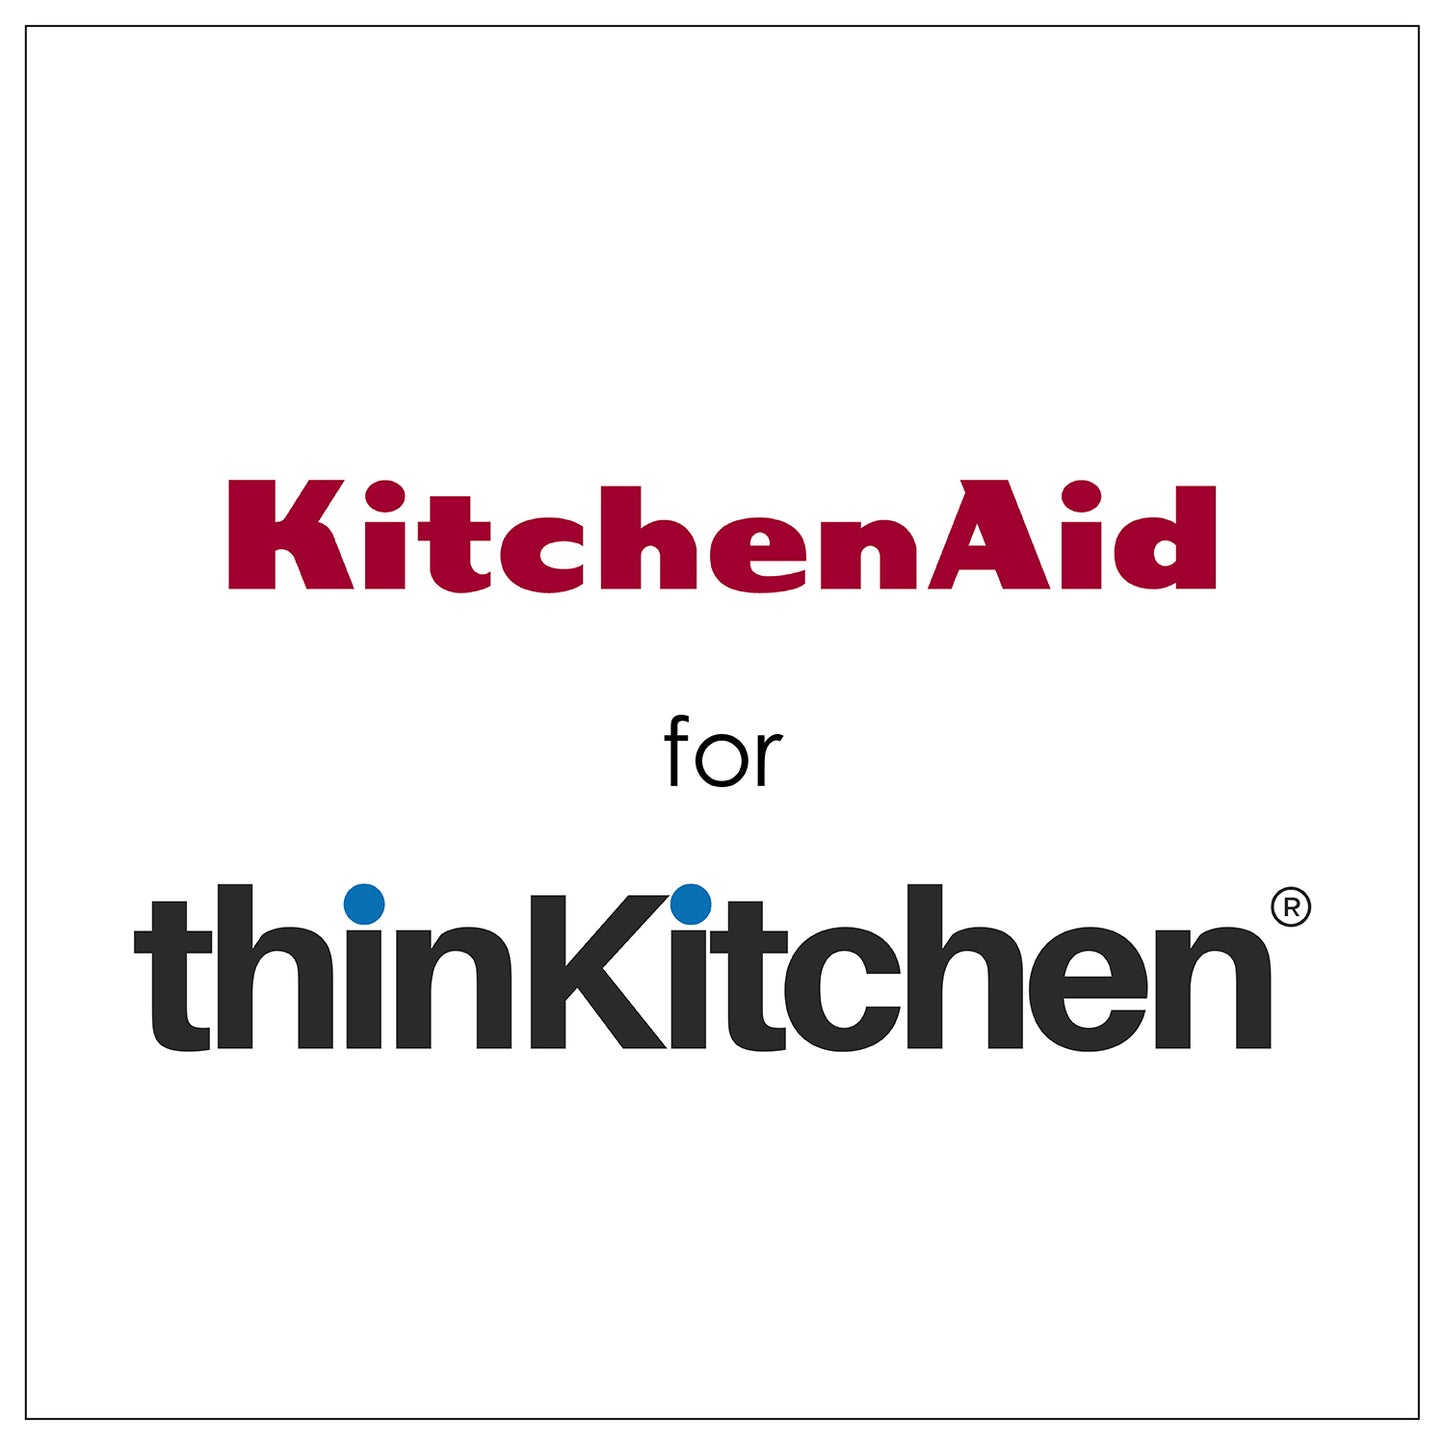 Kitchenaid Mixing And Measuring Bowl With Handle Black